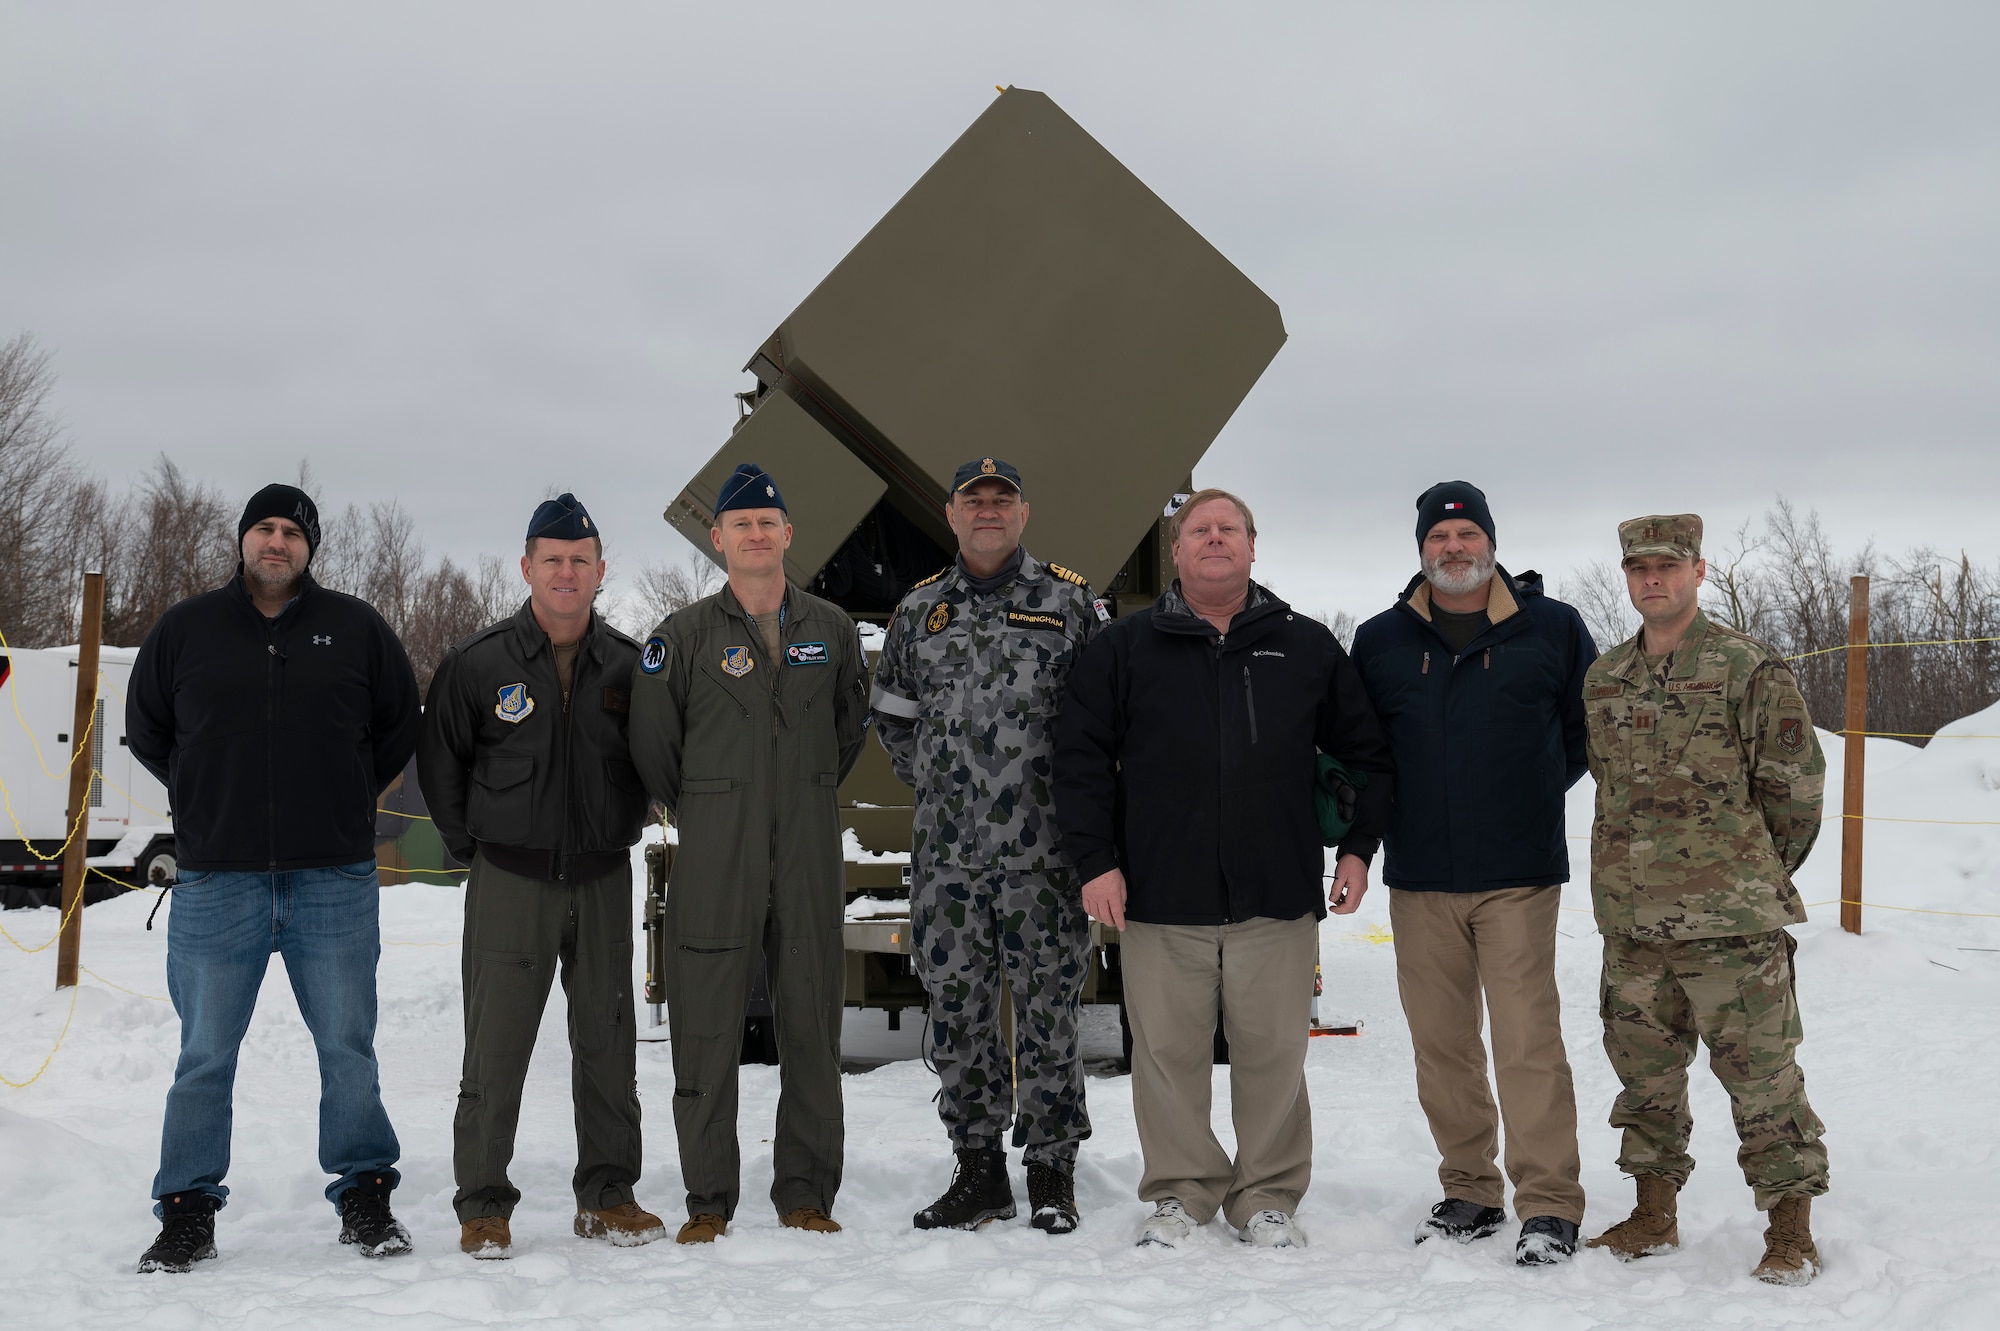 U.S. Airmen assigned to the 354th Range Squadron and representatives from the Royal Australian Navy pose in front of the Joint Pacific Alaska Range Complex’s first advanced emitter near Eielson Air Force Base, Alaska, March 1, 2022.